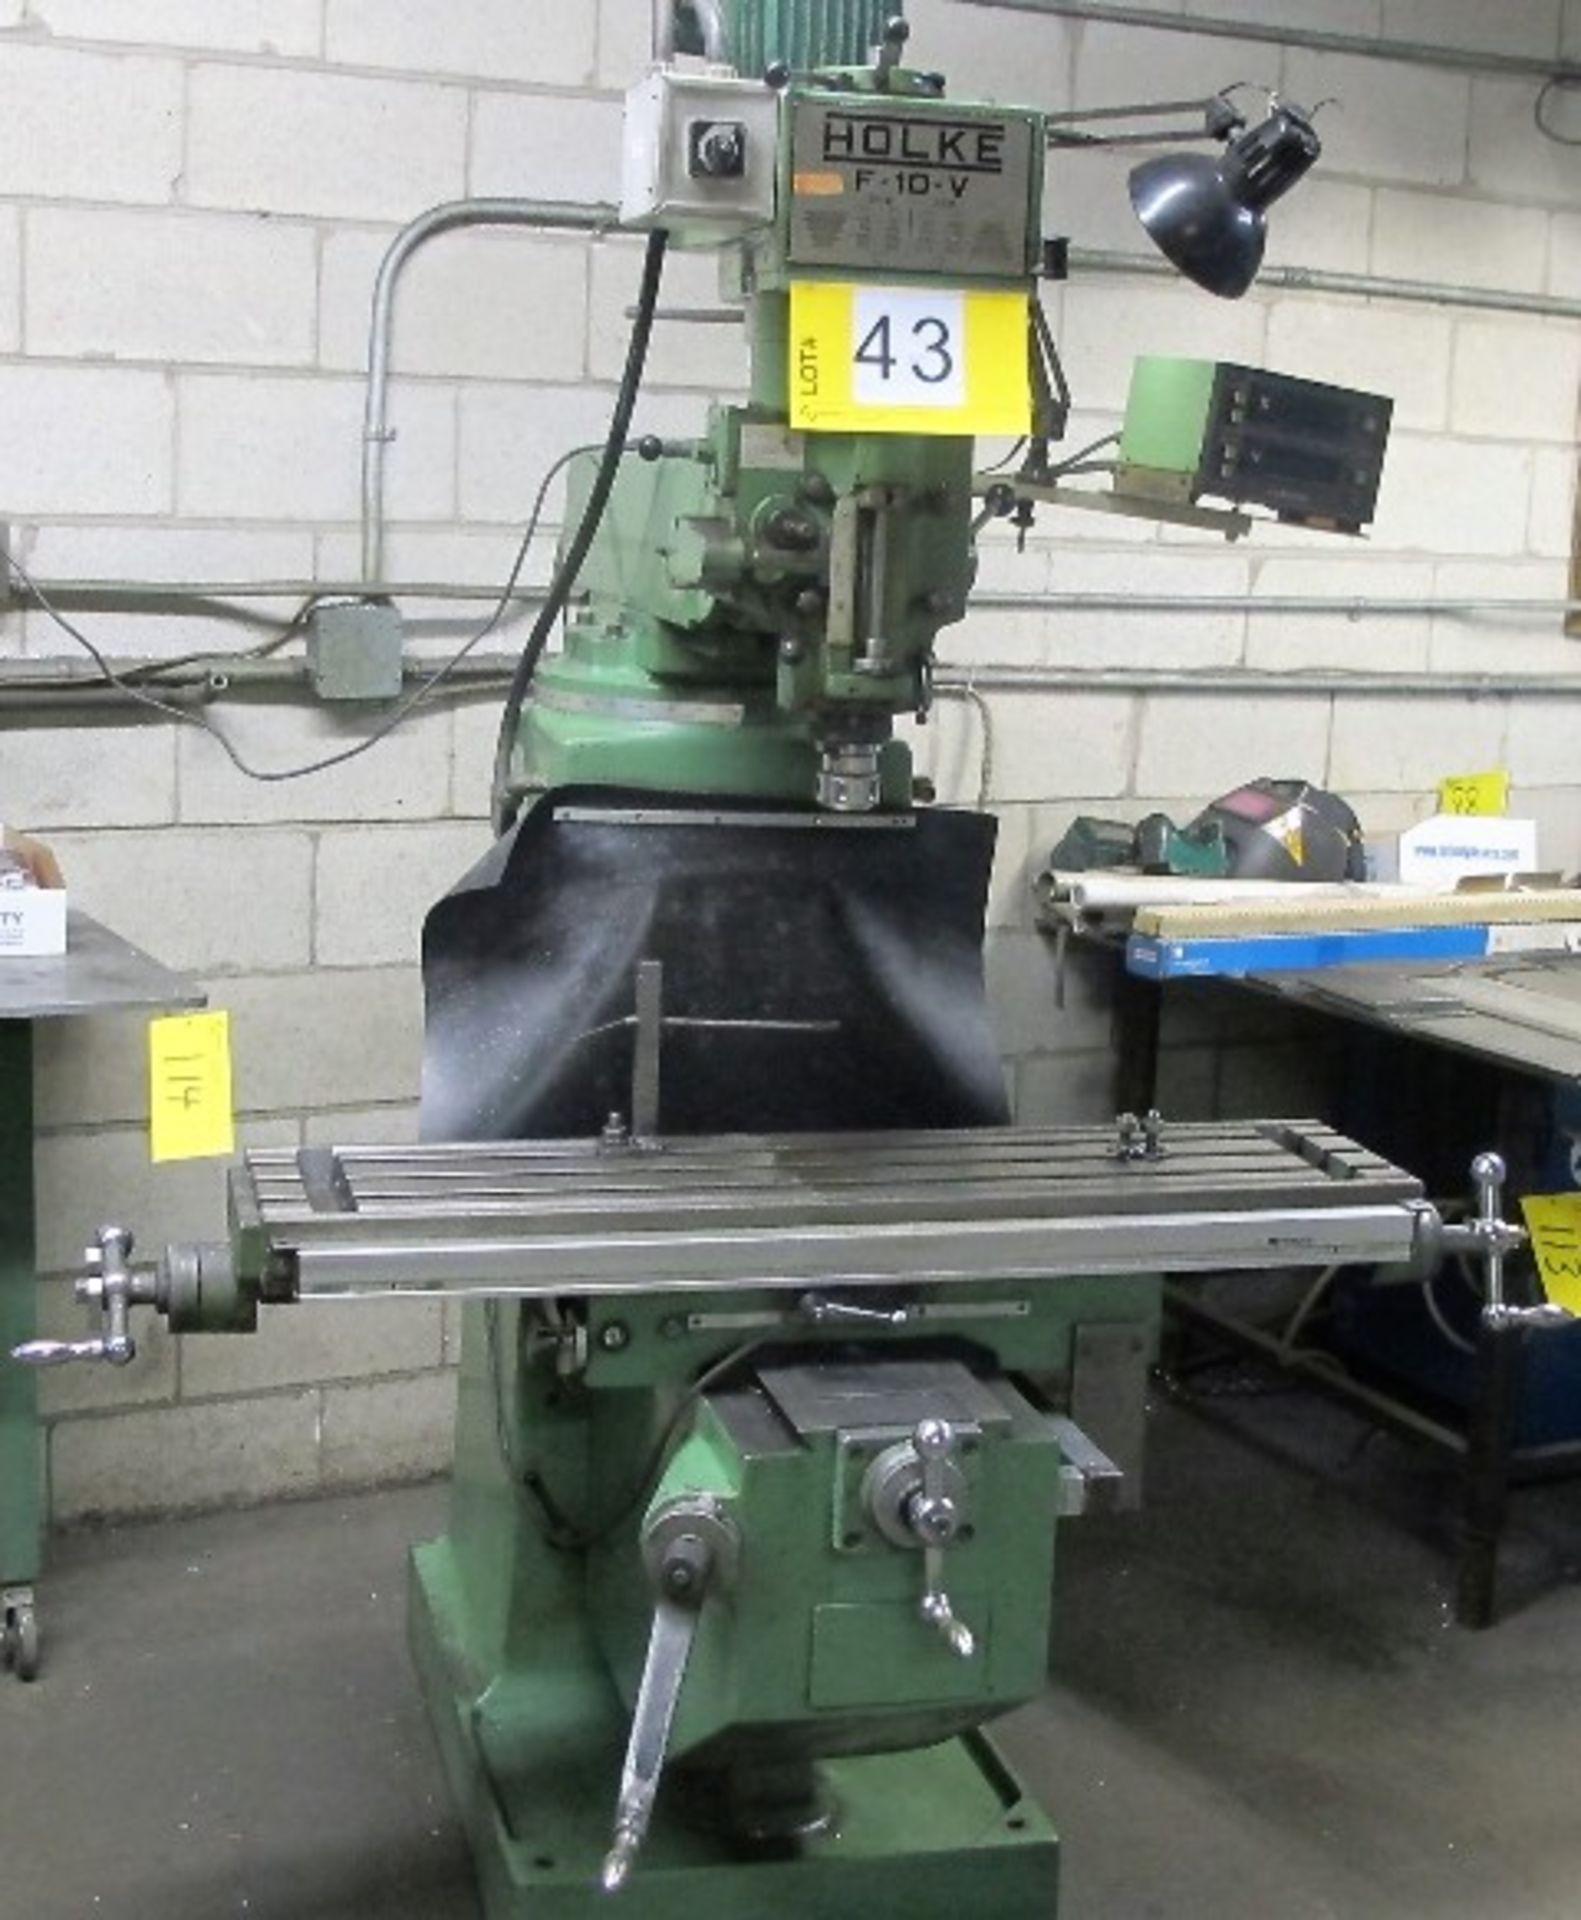 HOLKE F-10-V VERTICAL MILLING MACHINE, 10" X 44" TABLE, MITUTOYO 2-AXIS DRO, SPEEDS TO 4,550 RPM,